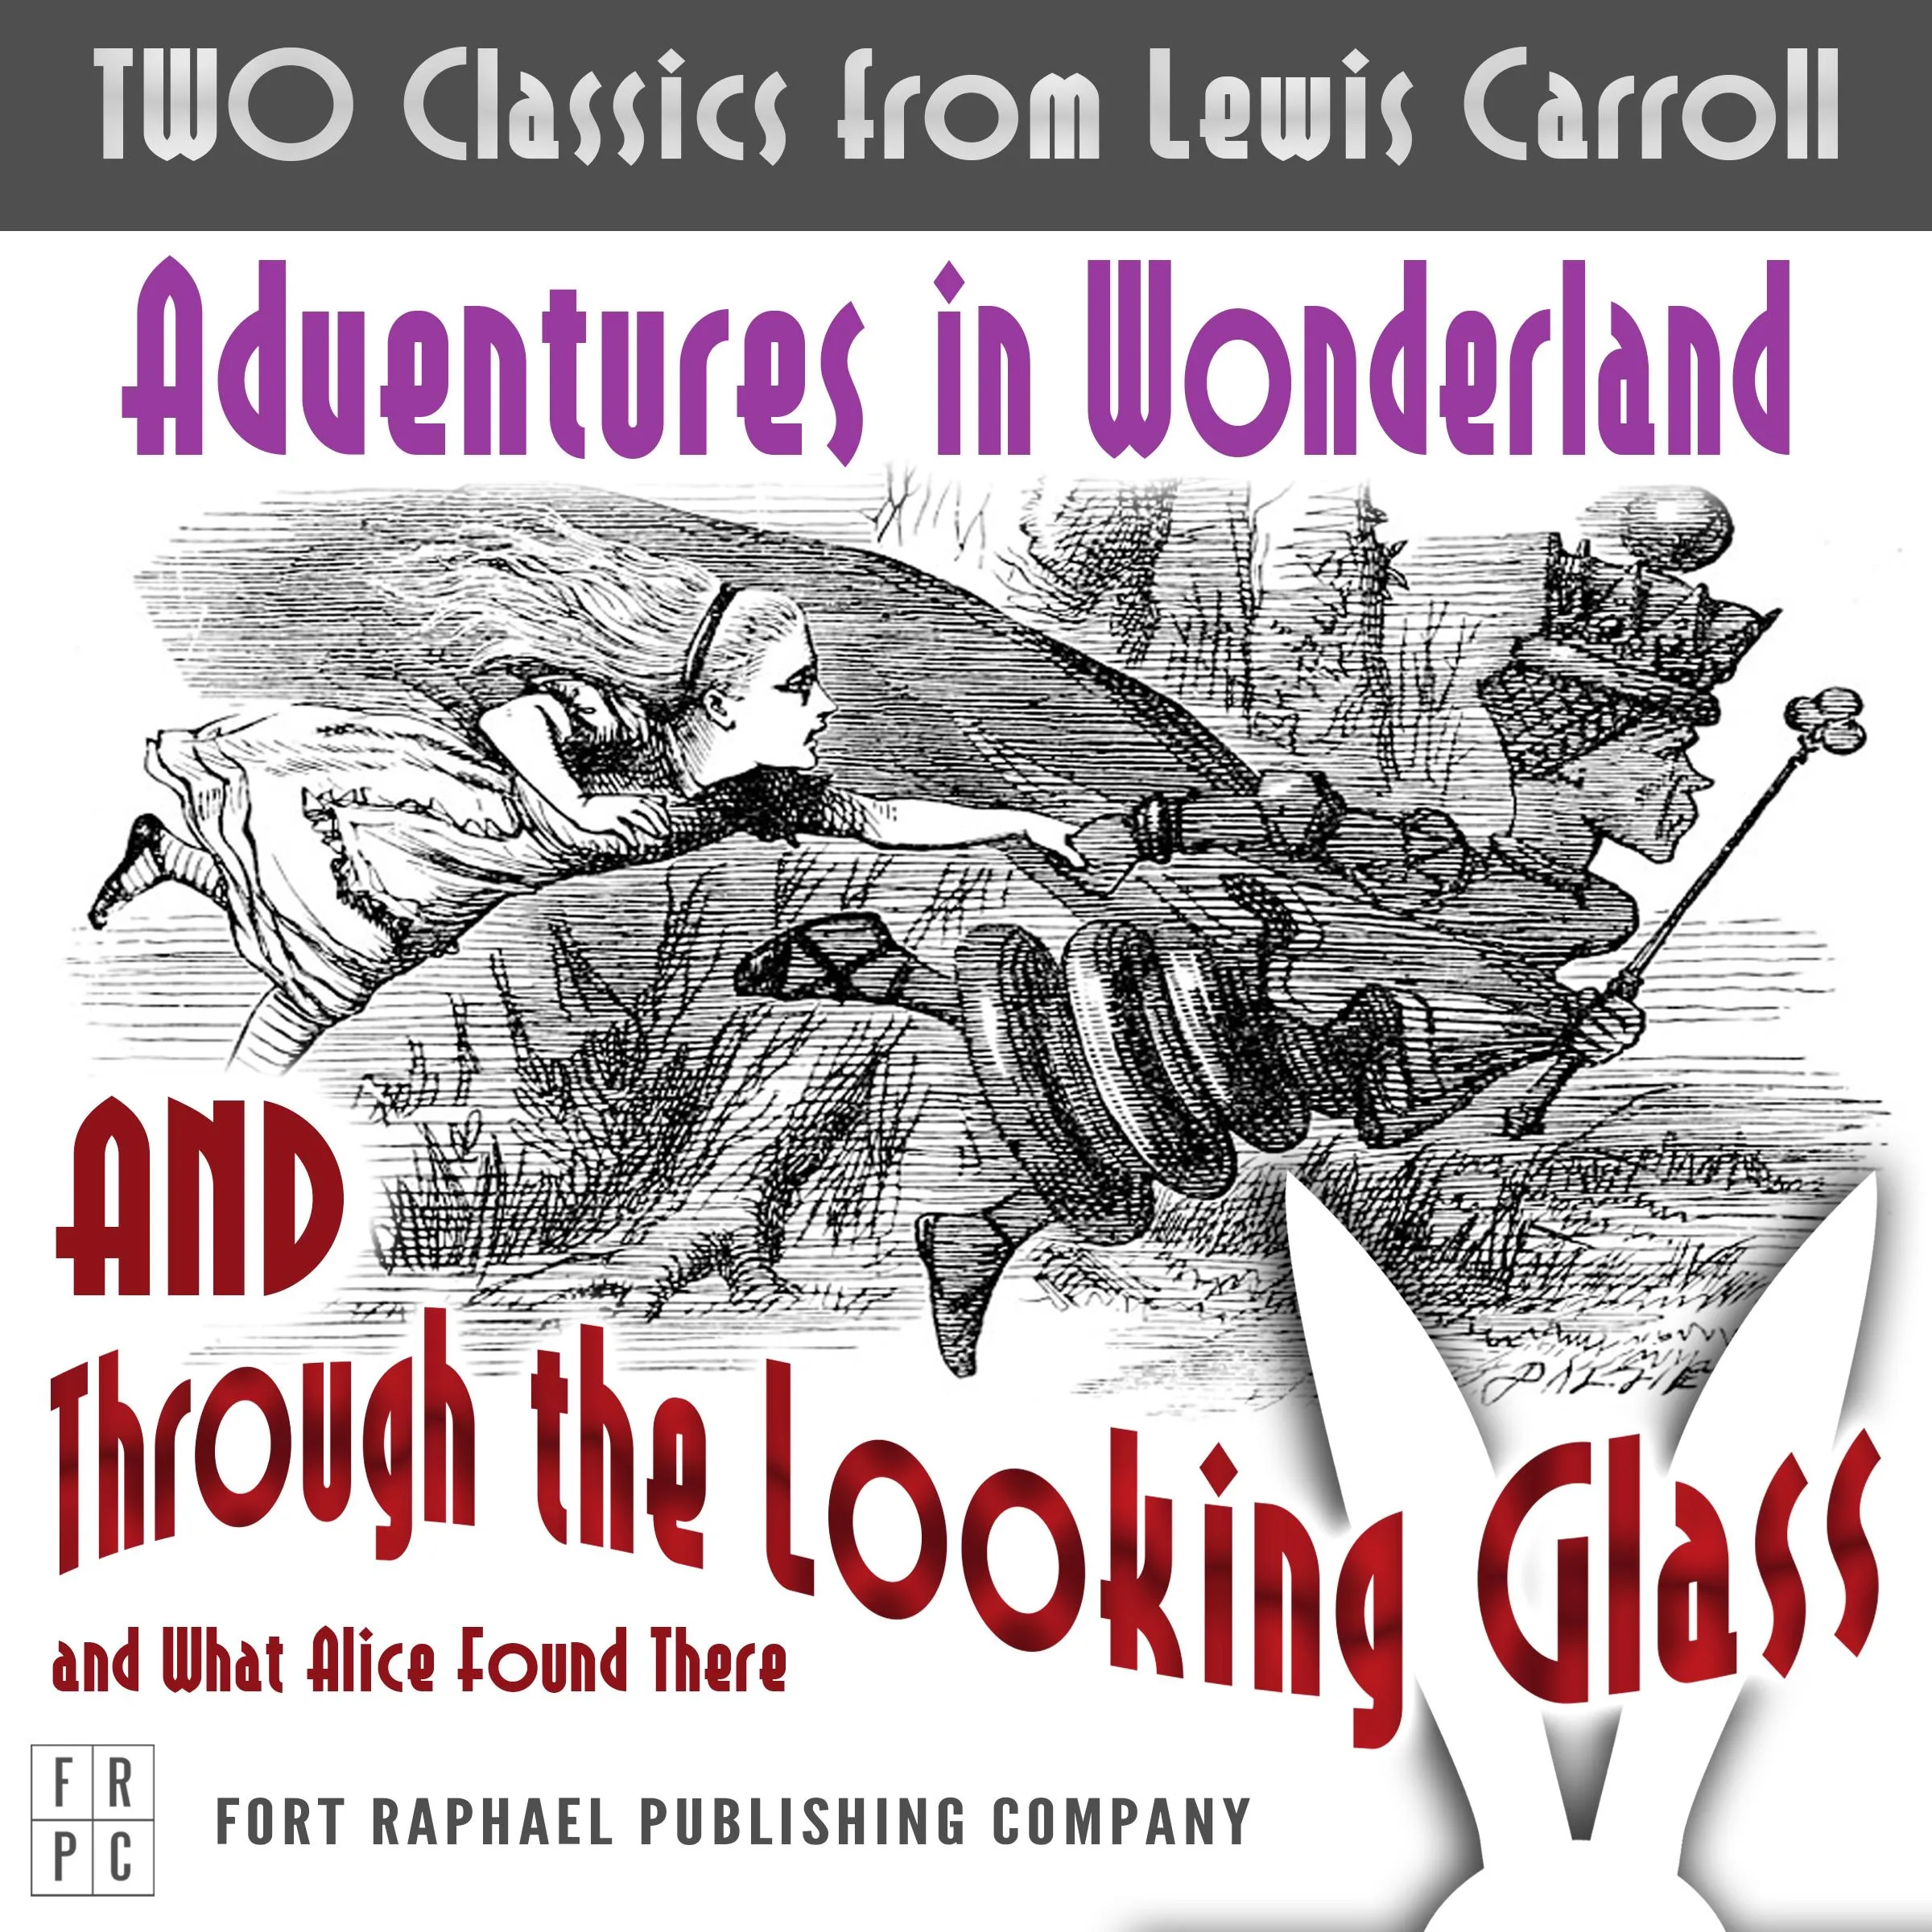 Lewis Carroll Classics, Alice in Wonderland & Alice through the looking glass